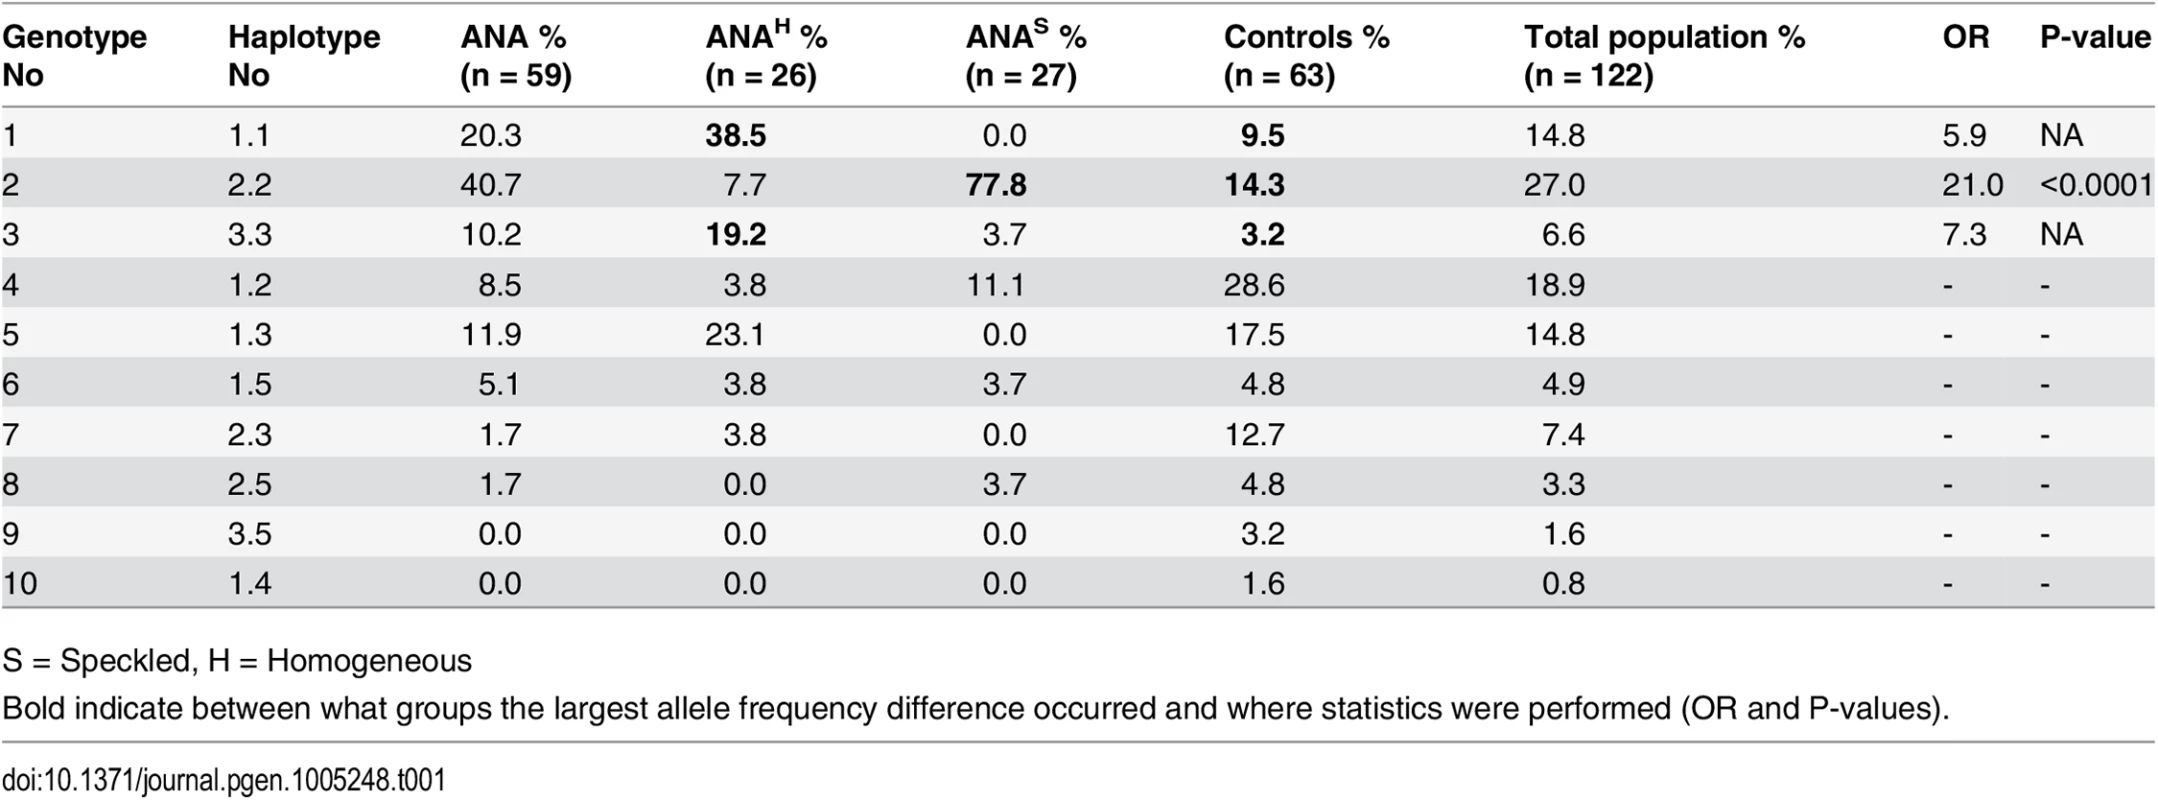 Genotype frequencies in the NSDTR population indicate an increased frequency for ANA<sup>S</sup> dogs homozygous for haplotype 2 (DLA-DRB1*00601/DQA1*005011/DQB1*02001) compared to controls and an increase in frequency for ANA<sup>H</sup> dogs with a homozygous haplotype (No 1.1 and 3.3) compared to controls.